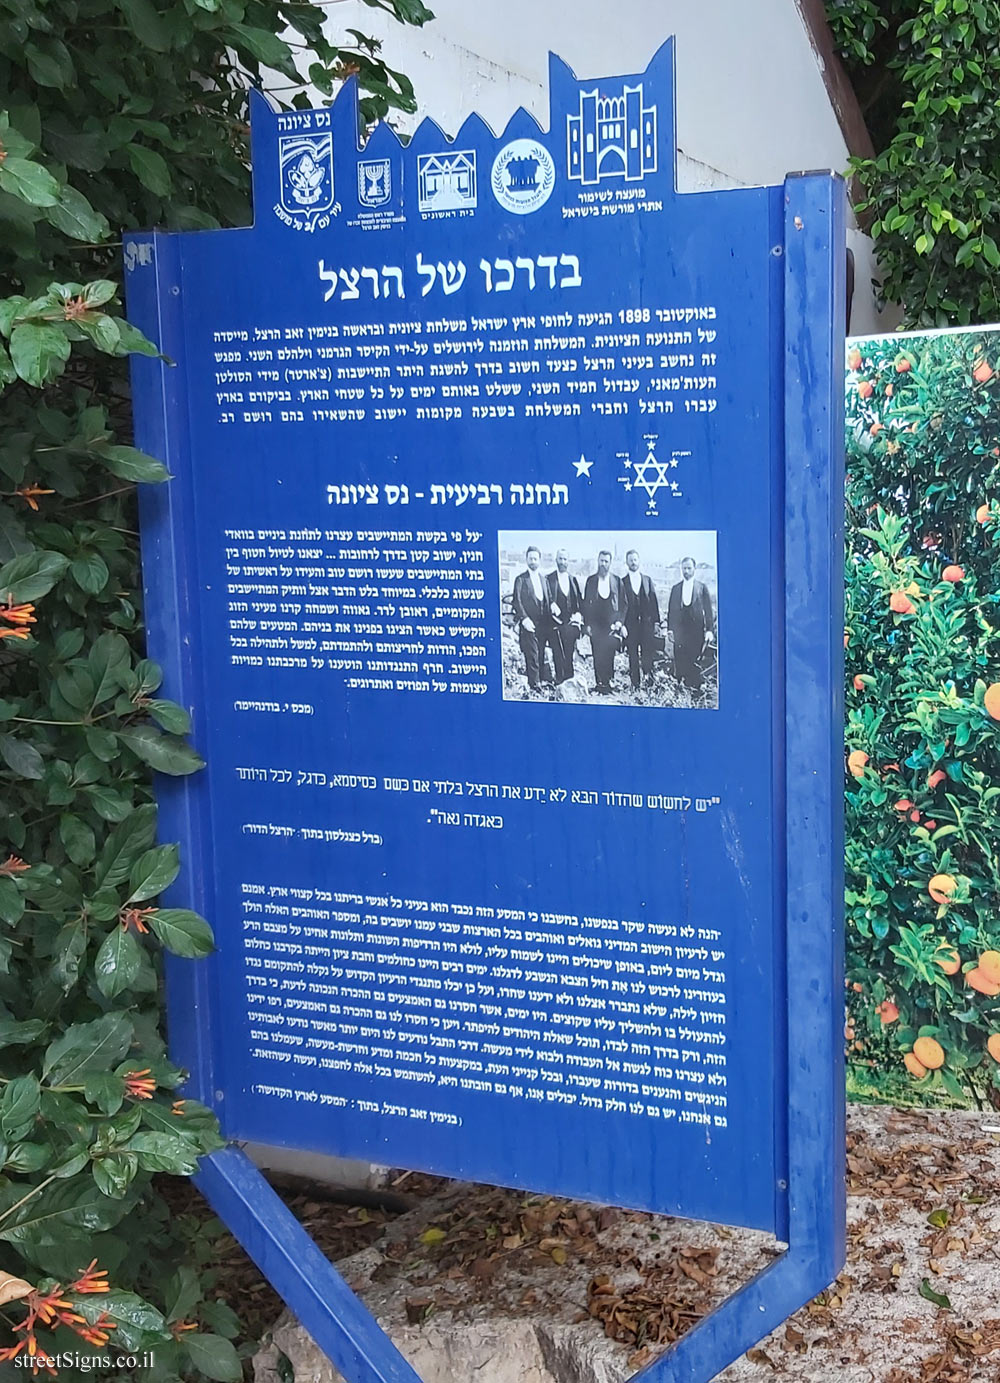 Ness Ziona - Heritage Sites in Israel - In Herzl’s Way - 4th Station